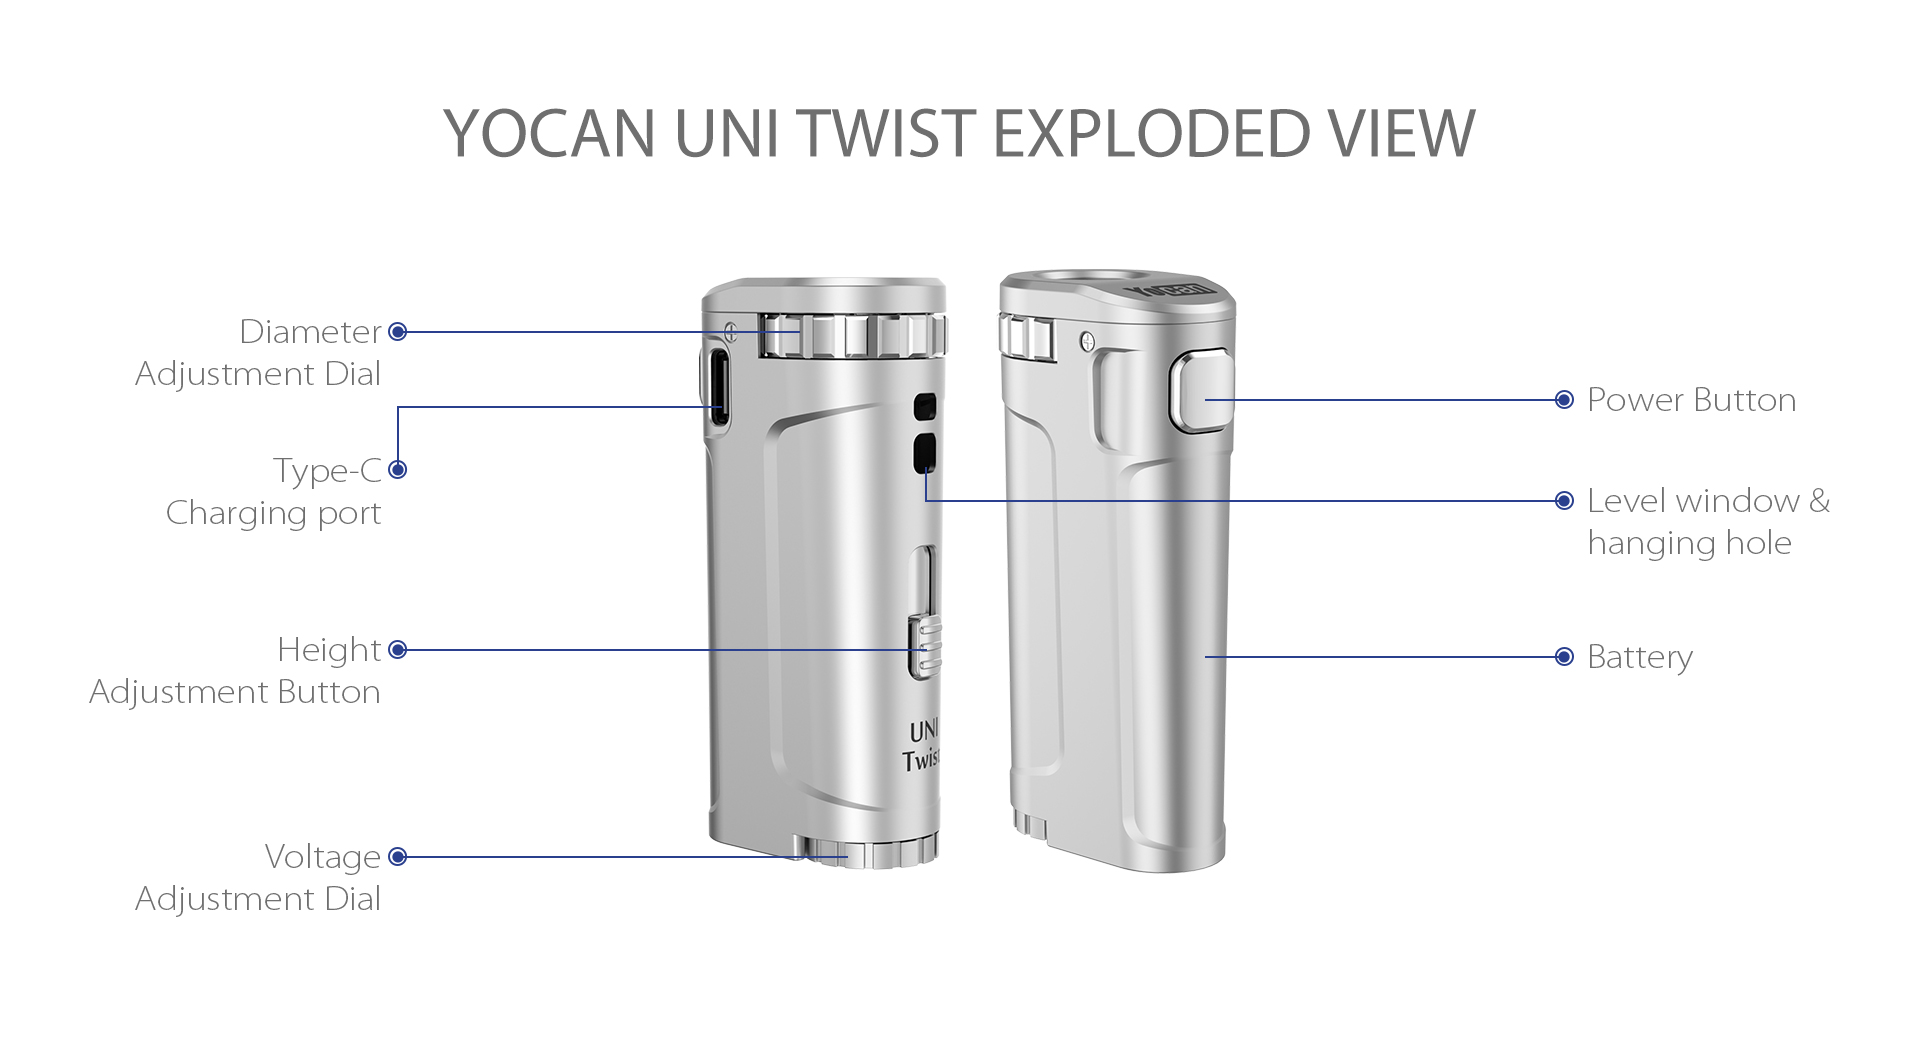 The exploded view of Yocan UNI Twist Universal Portable Mod.